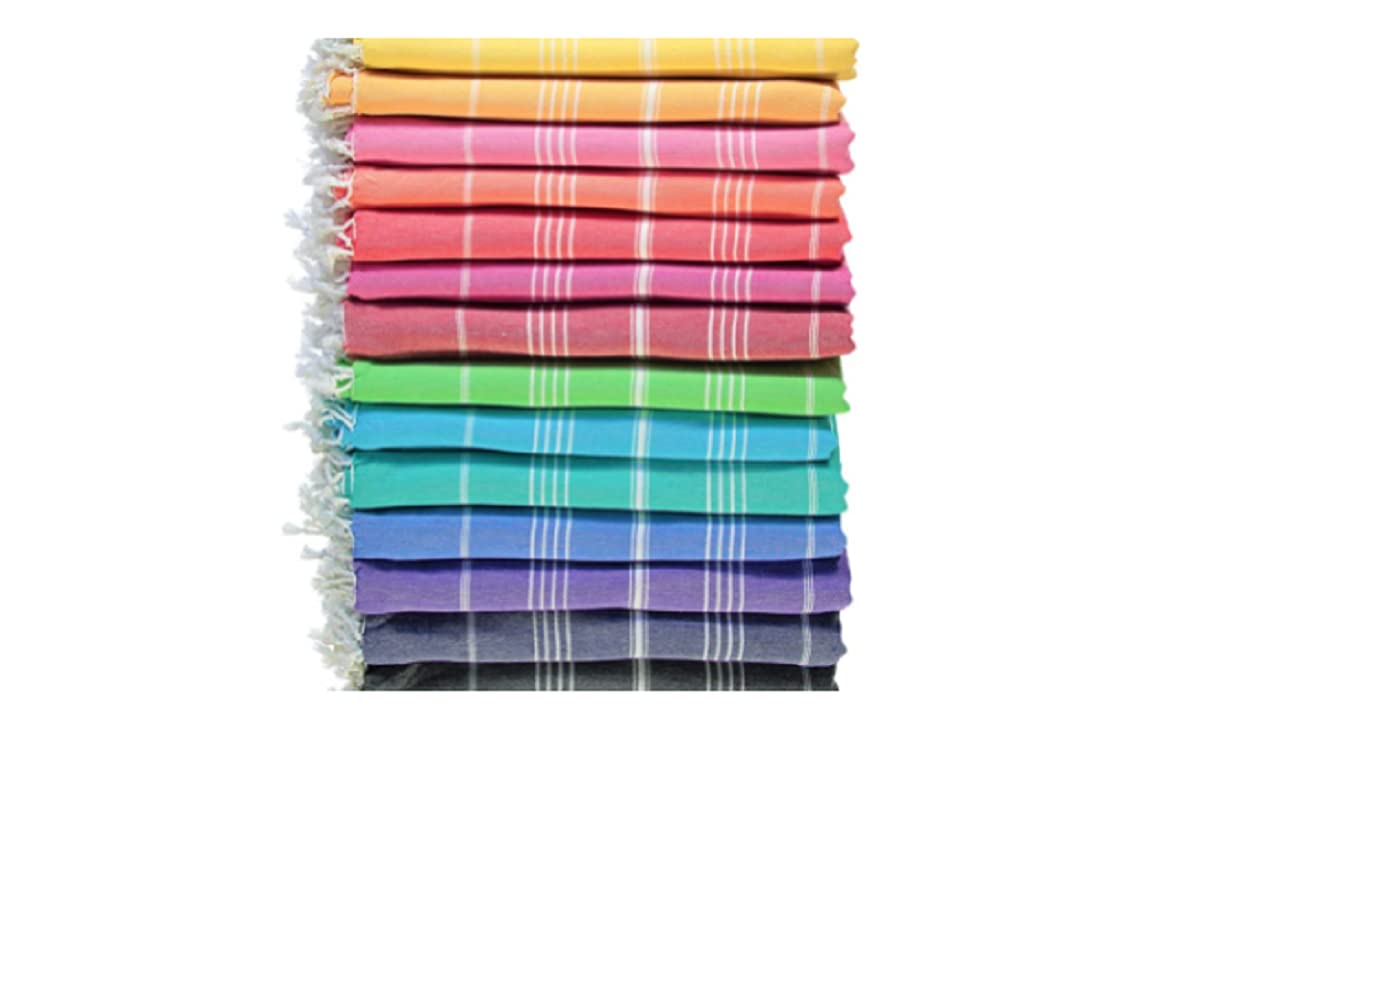 globaltrading Set of 6 Original 100 Cotton 70x39 Bath and Beach Turkish Towel Set - Highly Absorbent - Quick Dry - Over